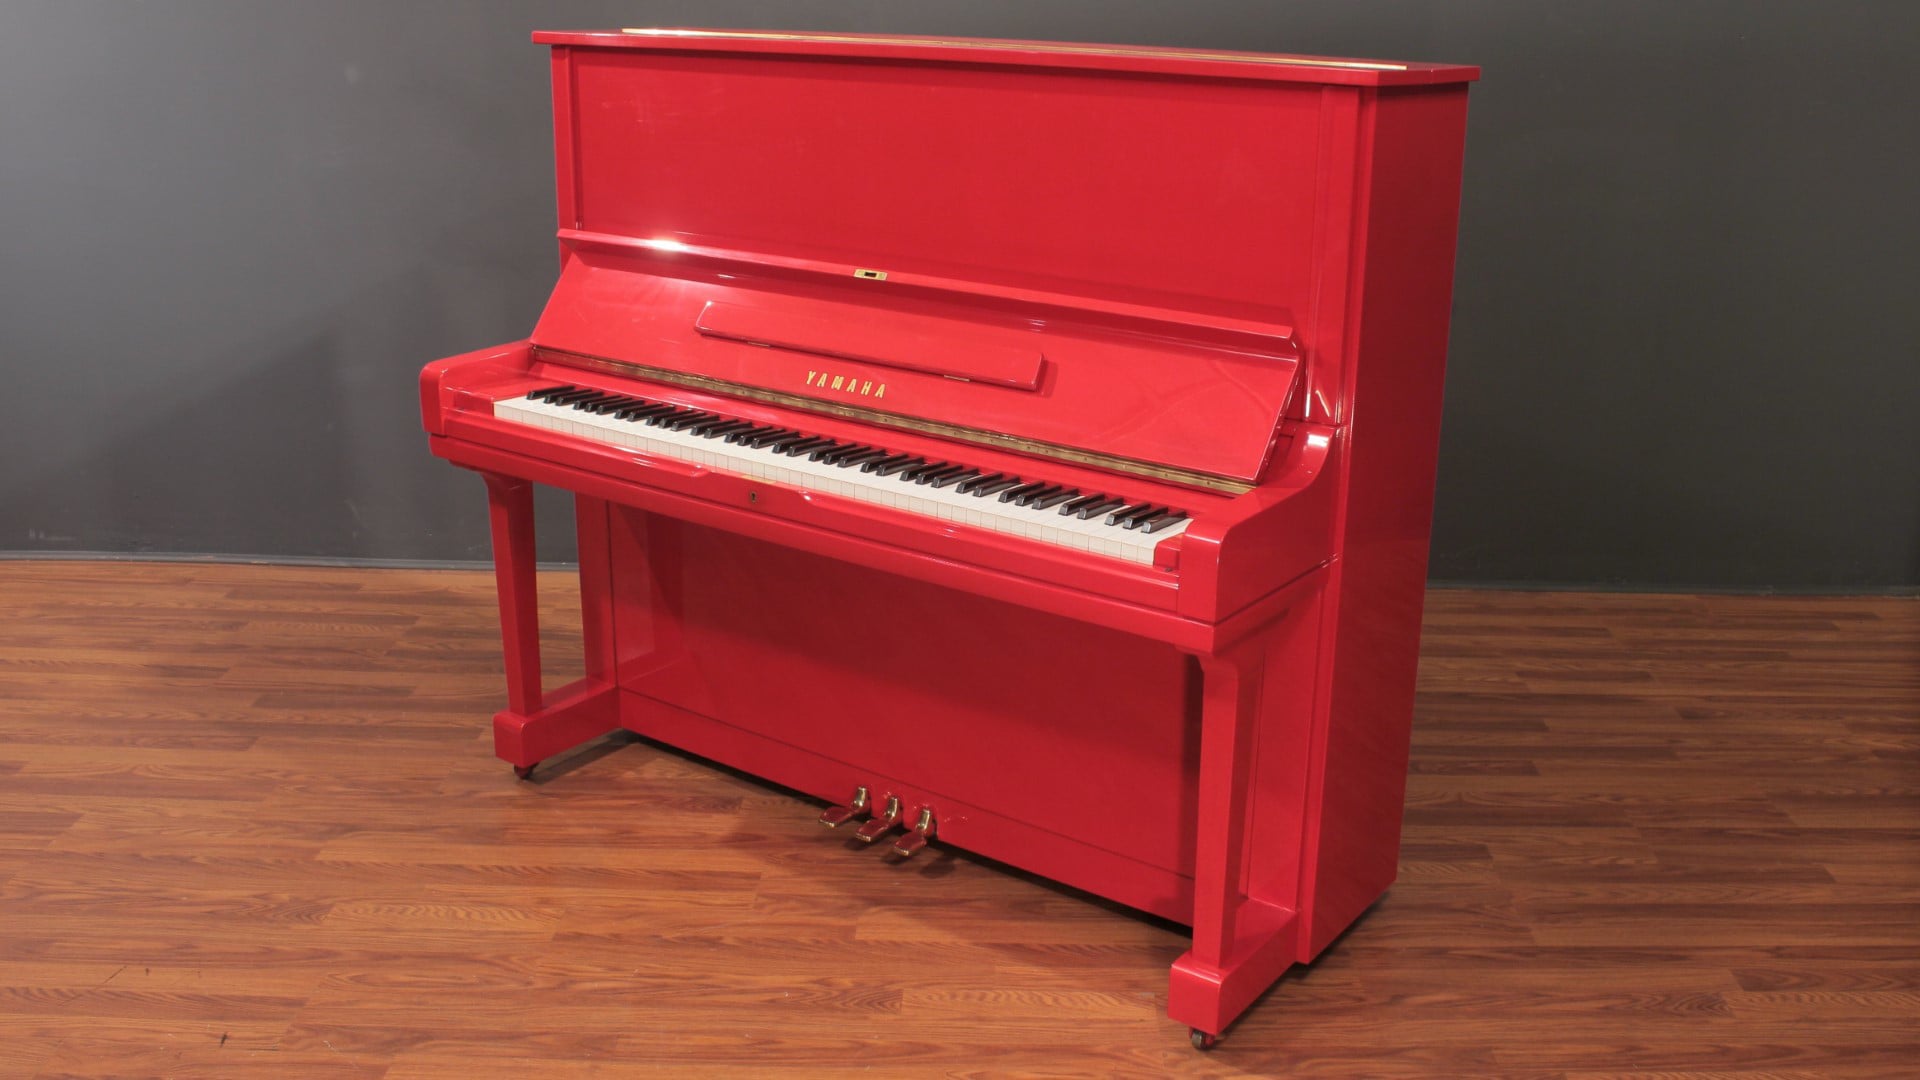 52" Upright Piano Polished Red Four Star Vimeo